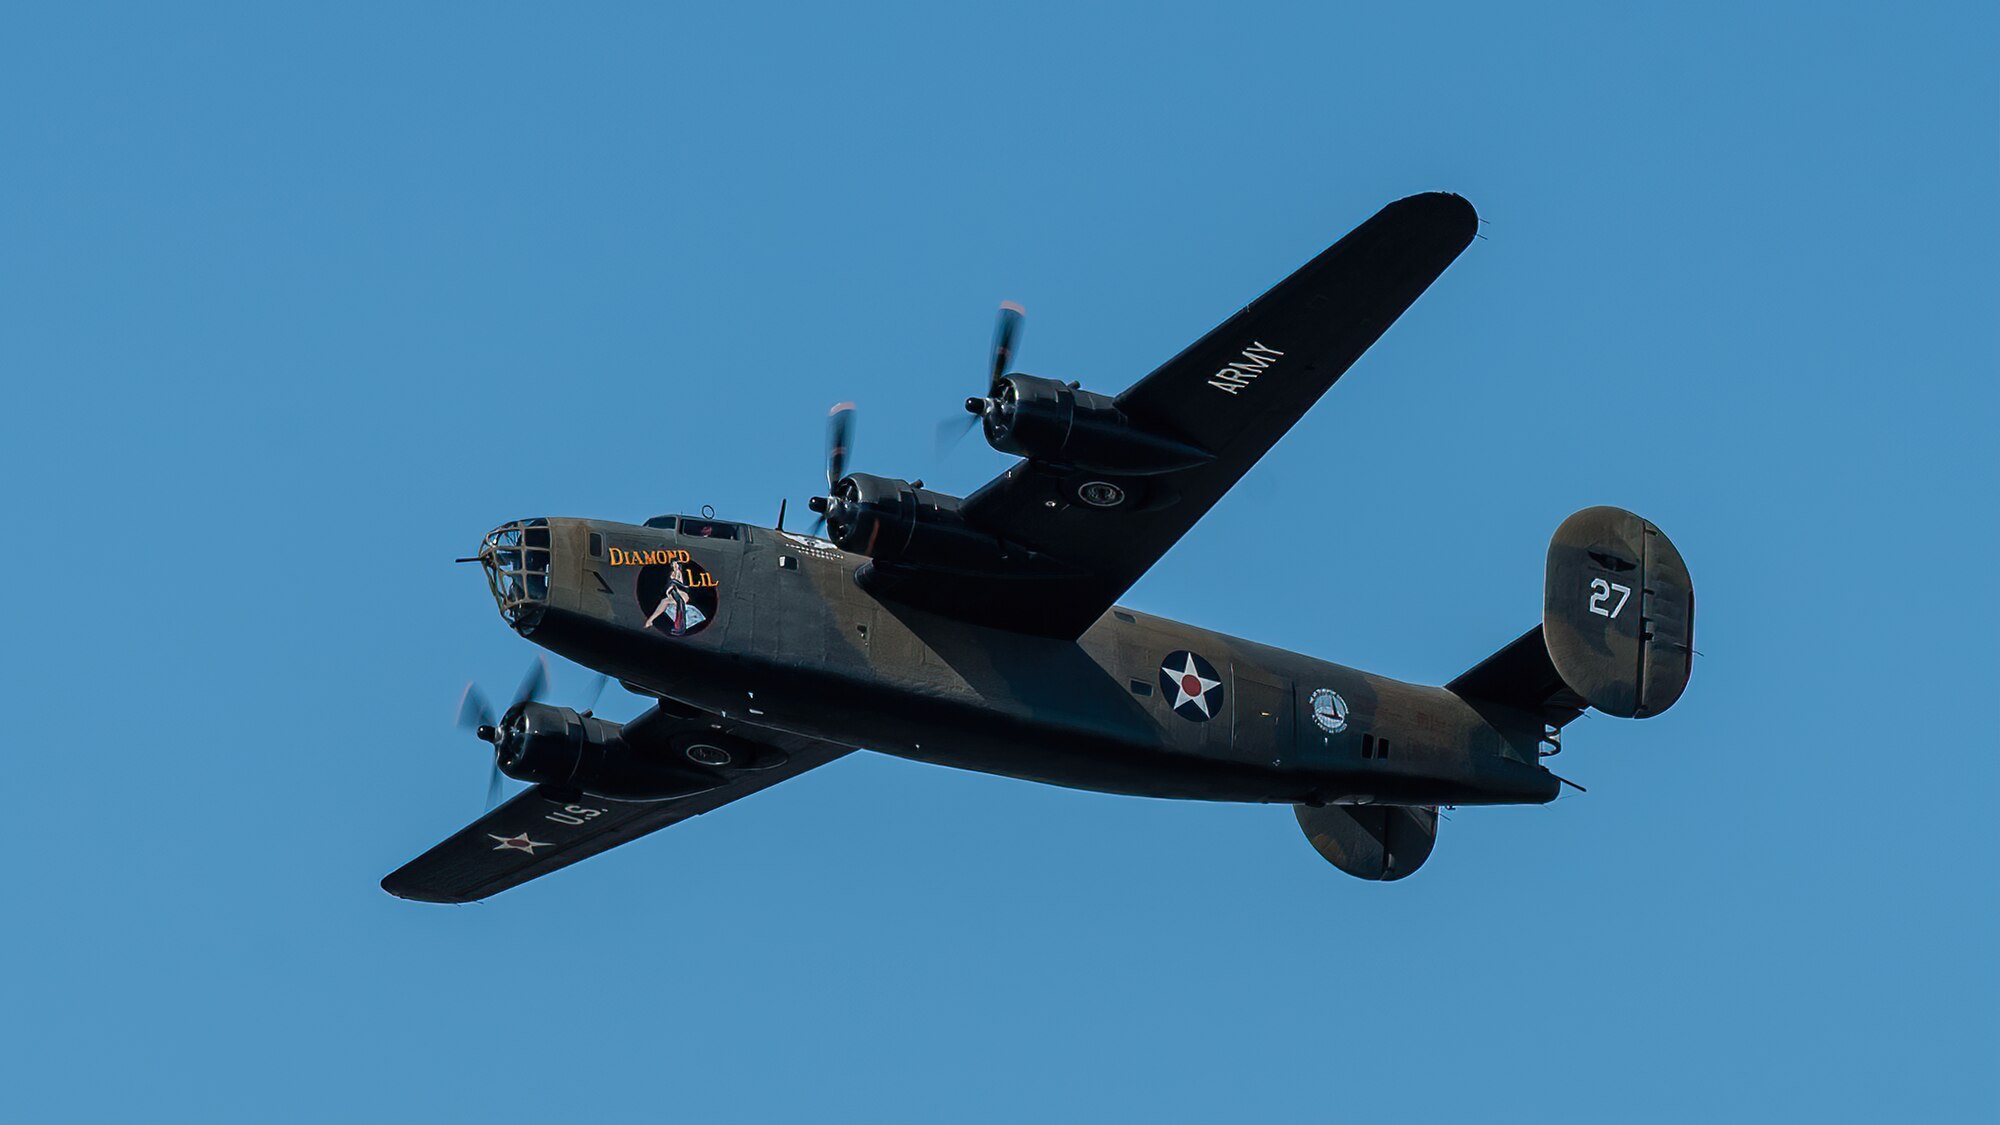 A B-24 Liberator from the Commemorative Air Force performs an aerial demonstration over the Ohio River in downtown Louisville, Ky., April 23, 2022 as part of the Thunder Over Louisville air show. This year’s event celebrated the 75th anniversary of the United States Air Force. (U.S. Air National Guard photo by Dale Greer)